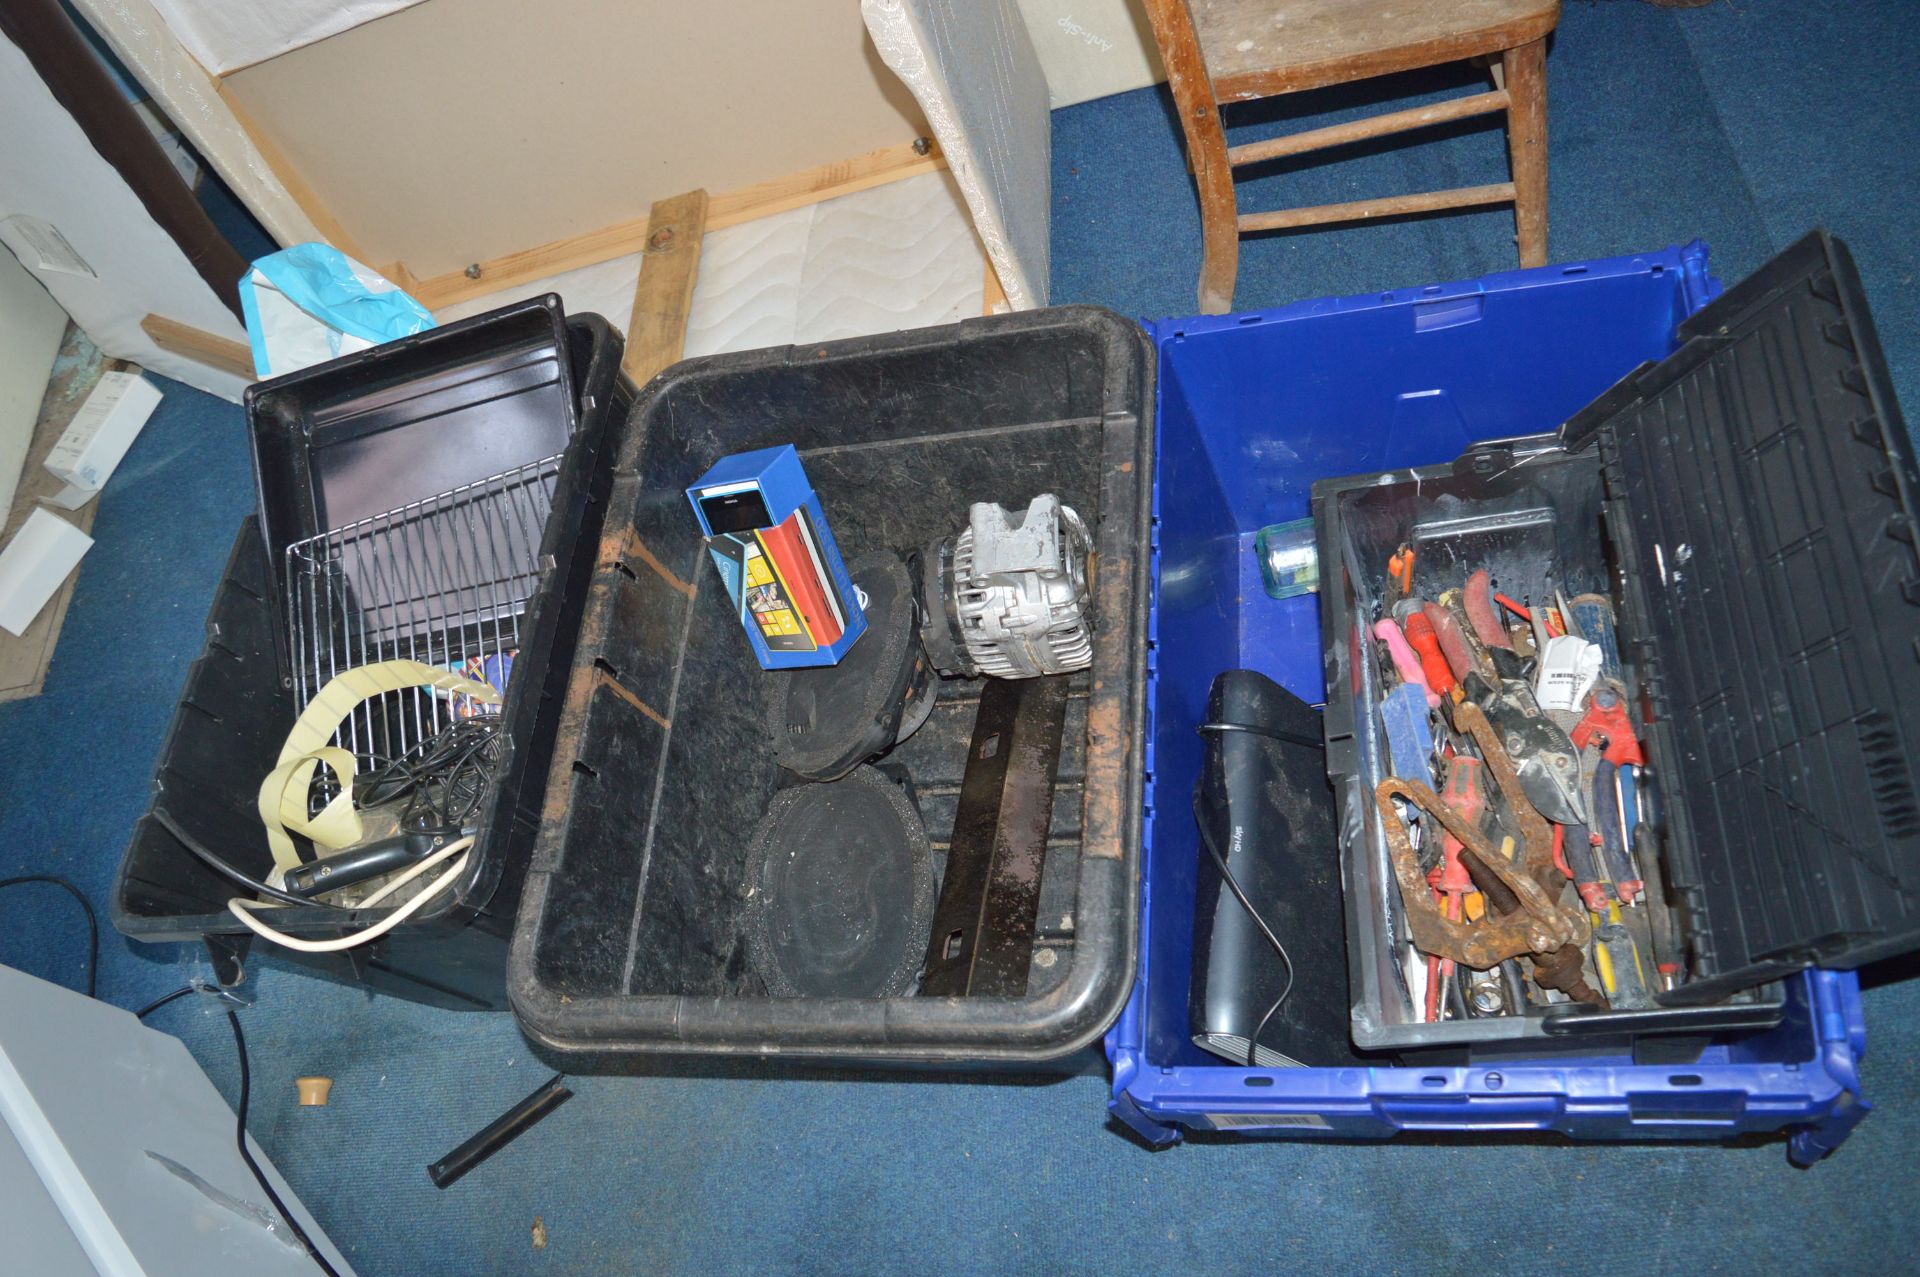 Three Boxes of Miscellaneous Items, Tools, etc.